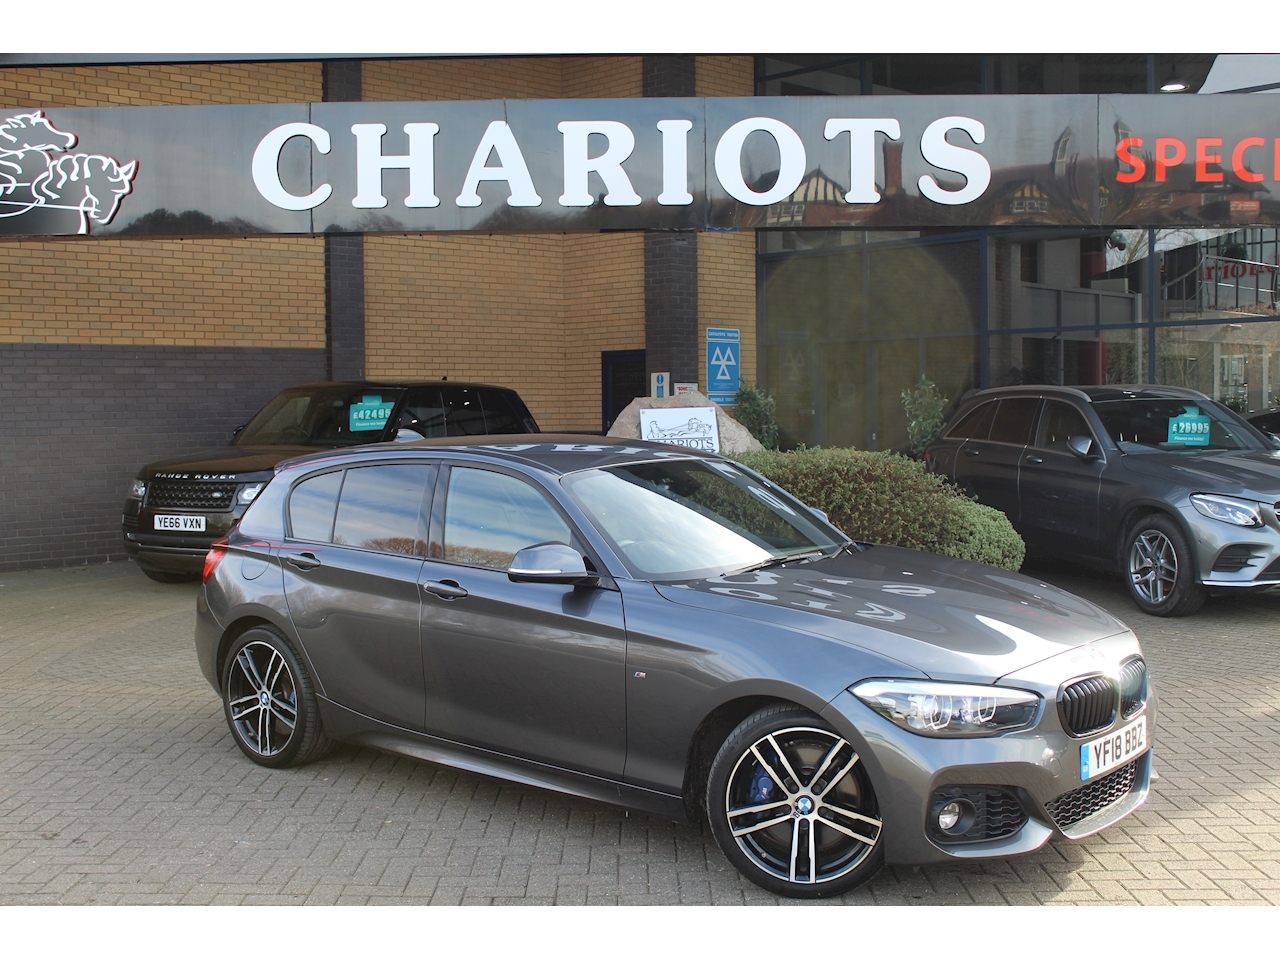 1.5 118i M Sport Shadow Edition Sports Hatch 5dr Petrol Auto (s/s) (136 ps)